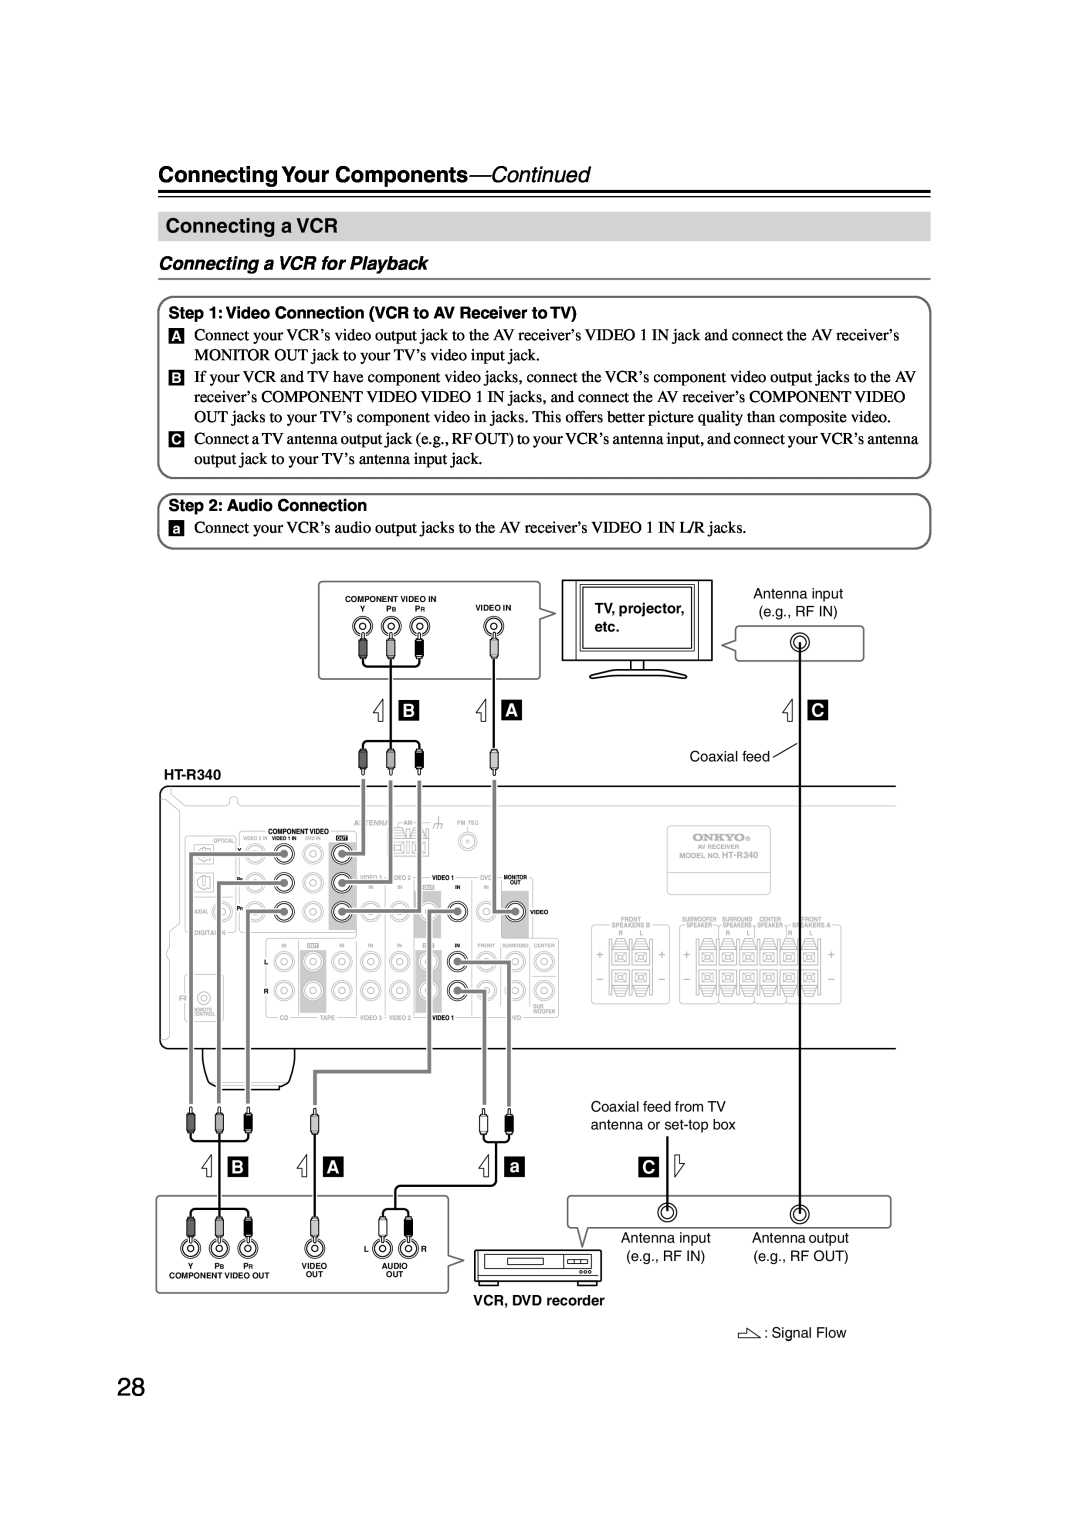 Onkyo HT-S590 instruction manual Connecting a VCR for Playback, Connecting Your Components-Continued 